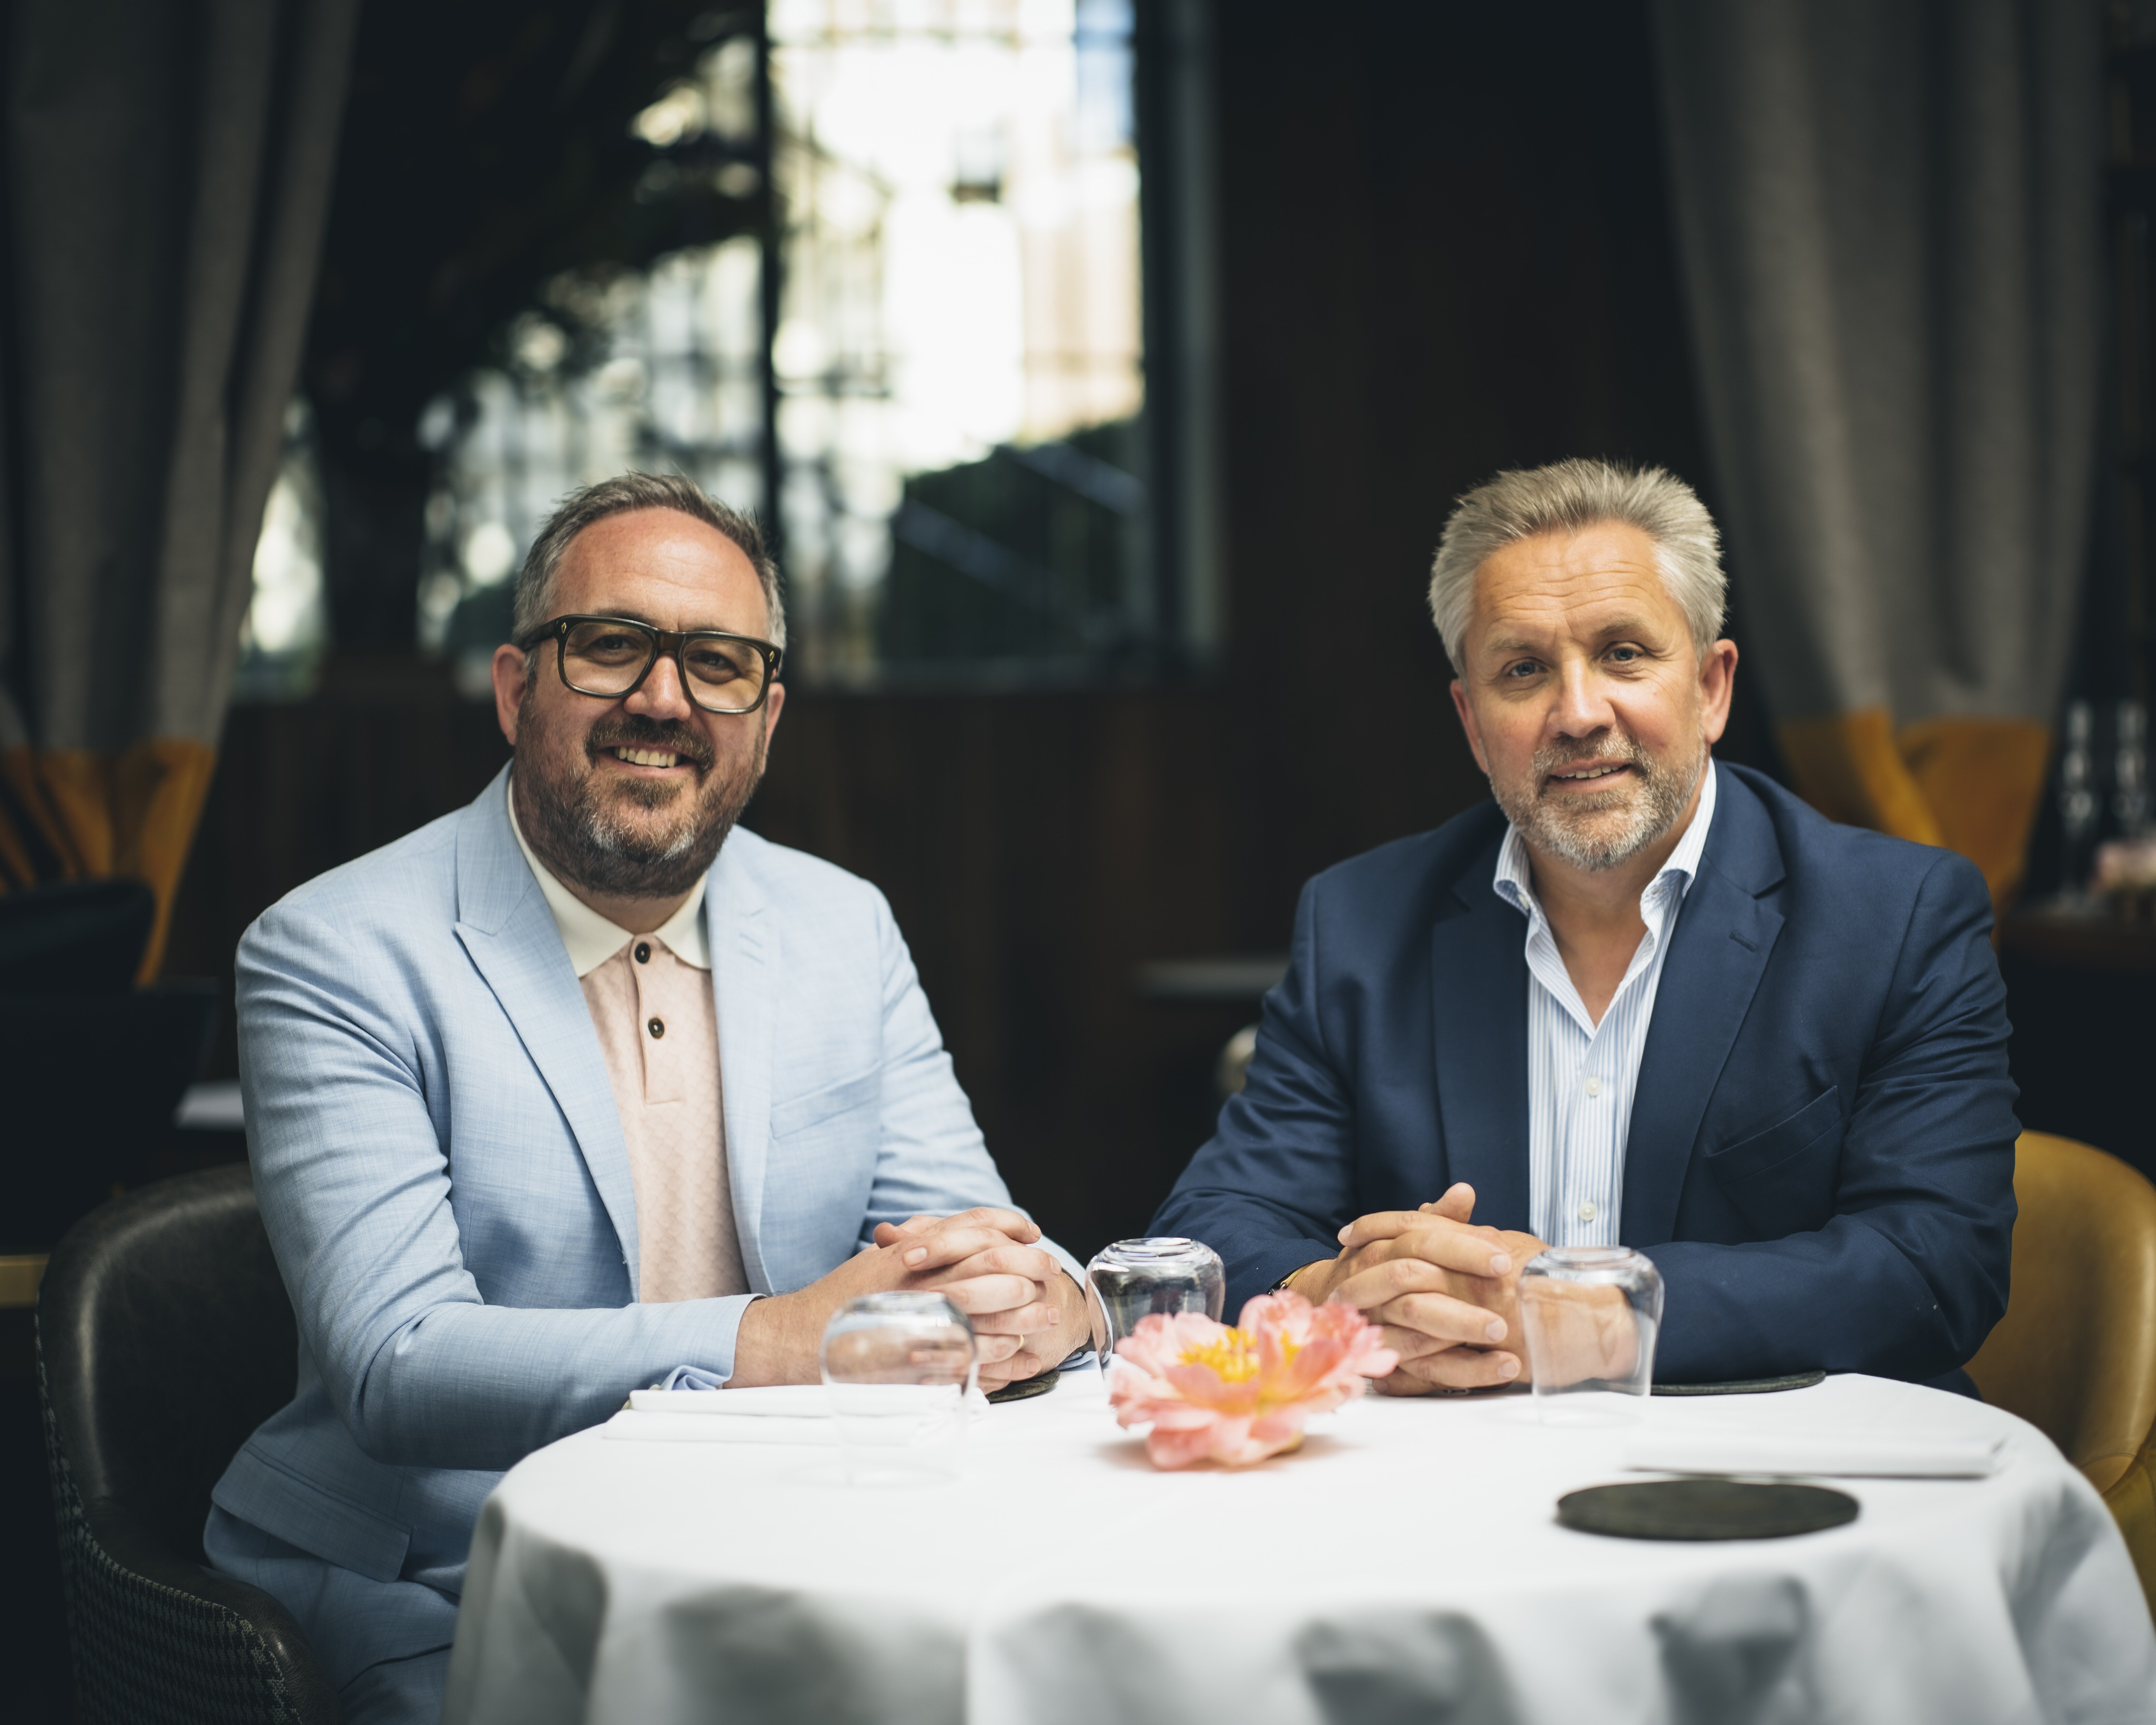 Native and Sarap backed by new £50m hospitality investment fund